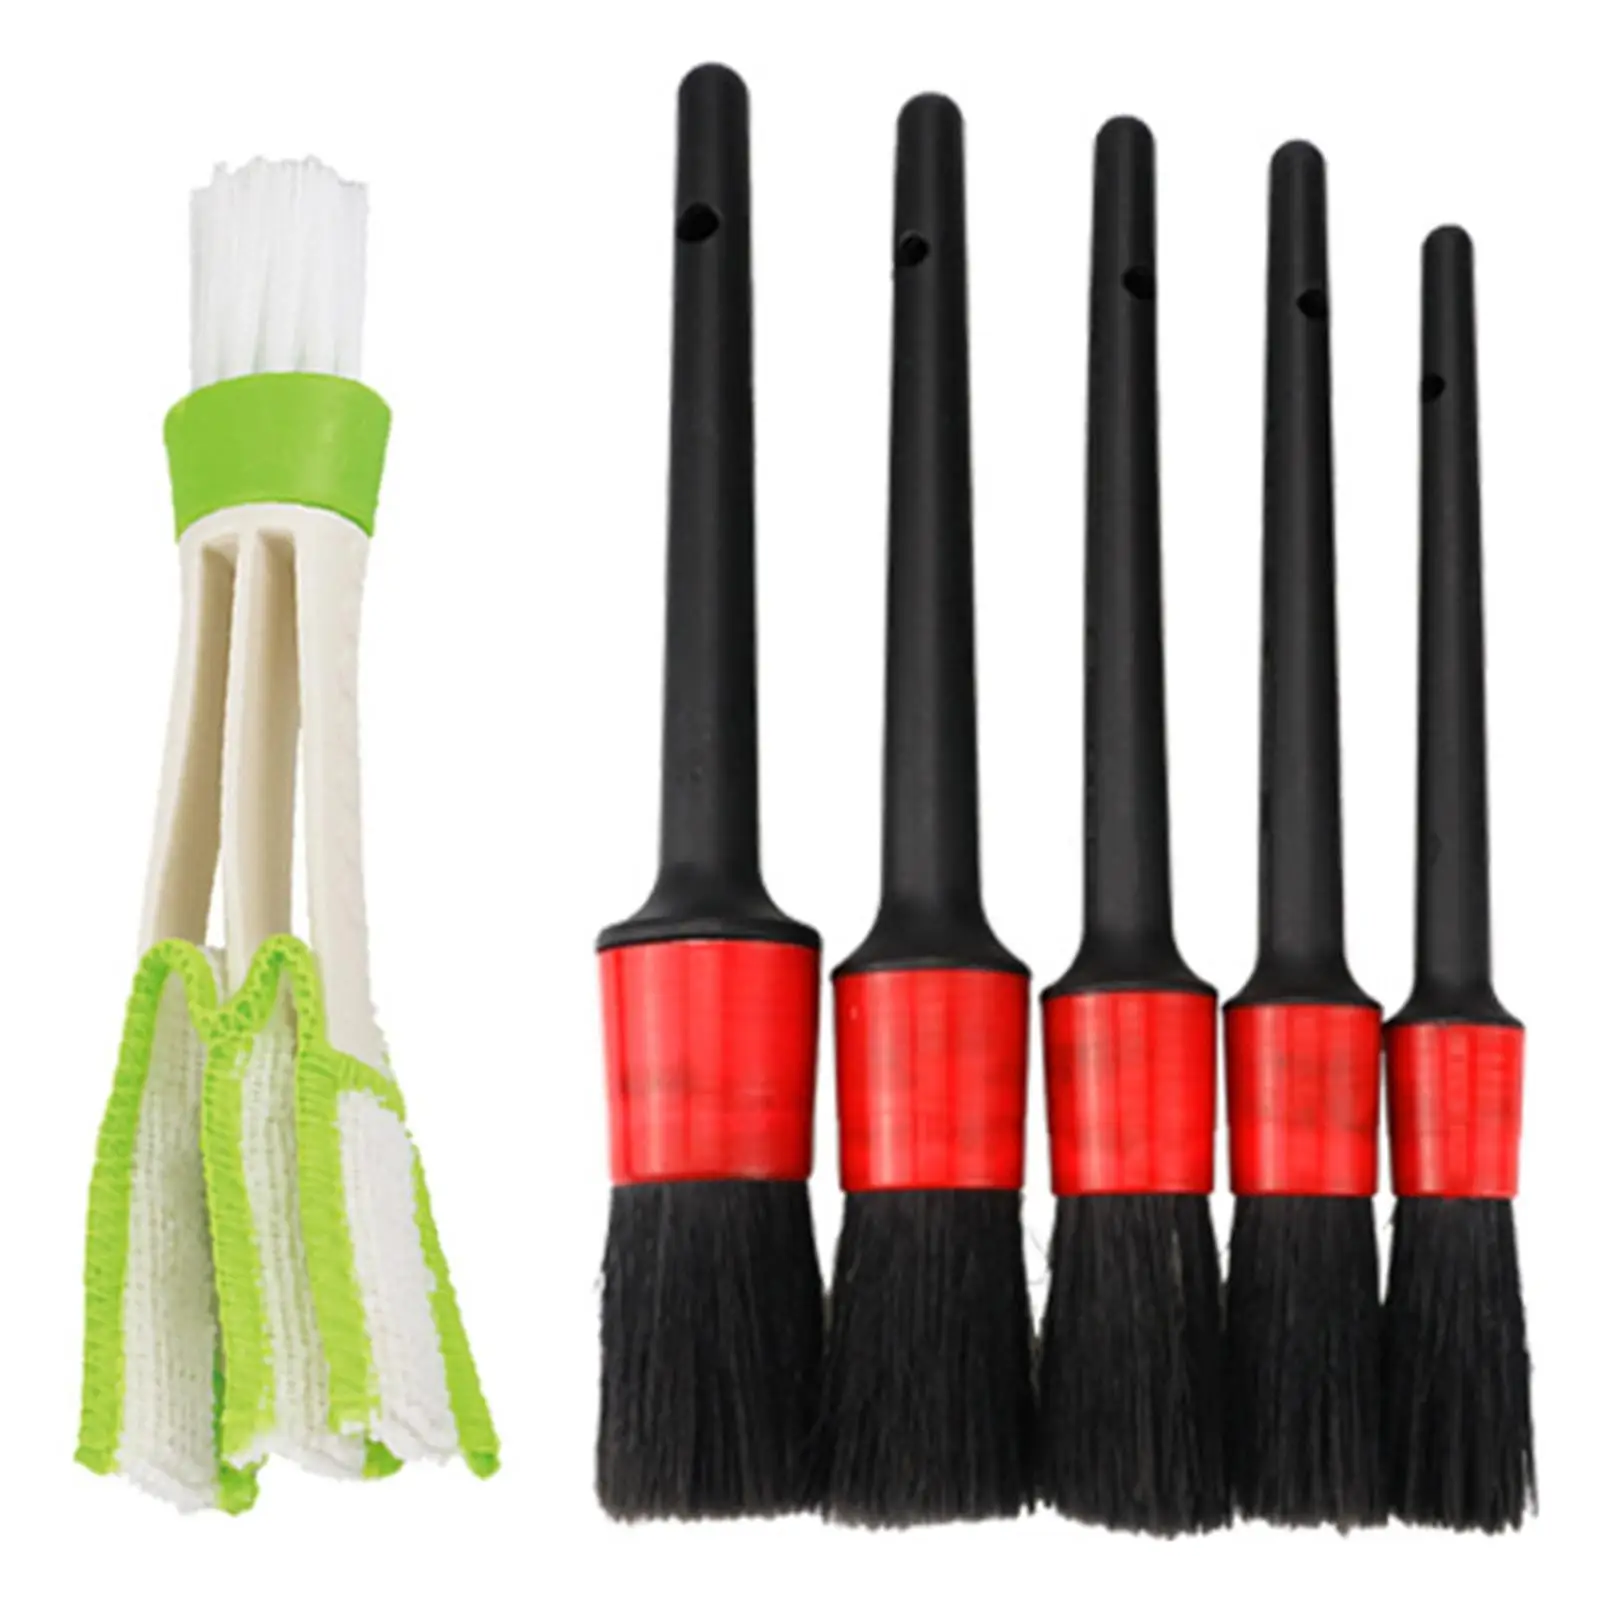 

6x Auto Detailing Brush Set Automotive Detail Brush Set for Dashboard Interior Cleaning Undercarriage Rims Exhaust Tips